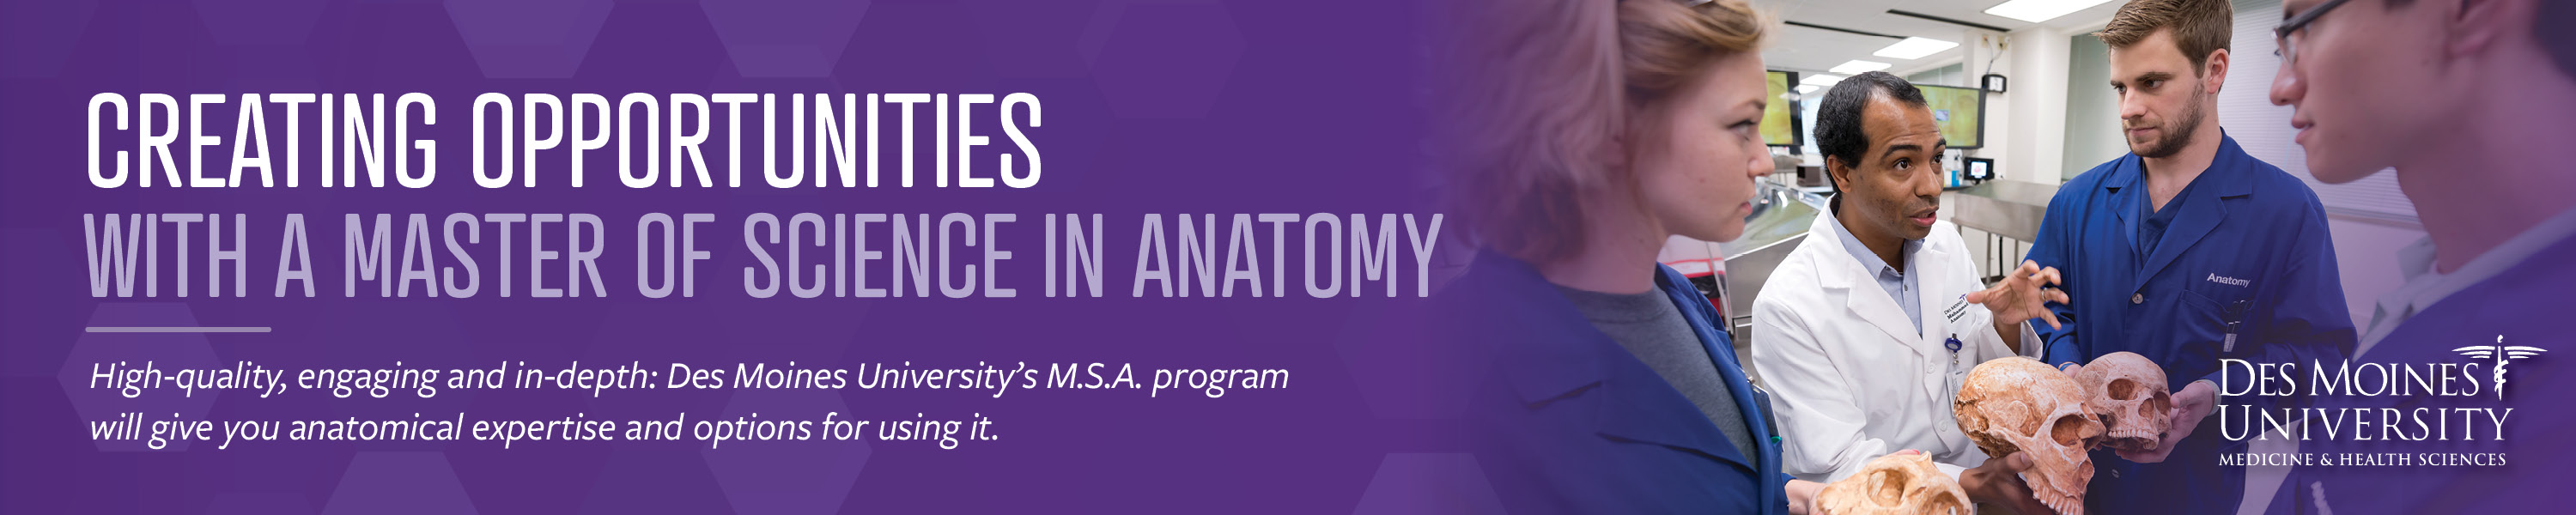 Des Moines University - Master of Science in Anatomy